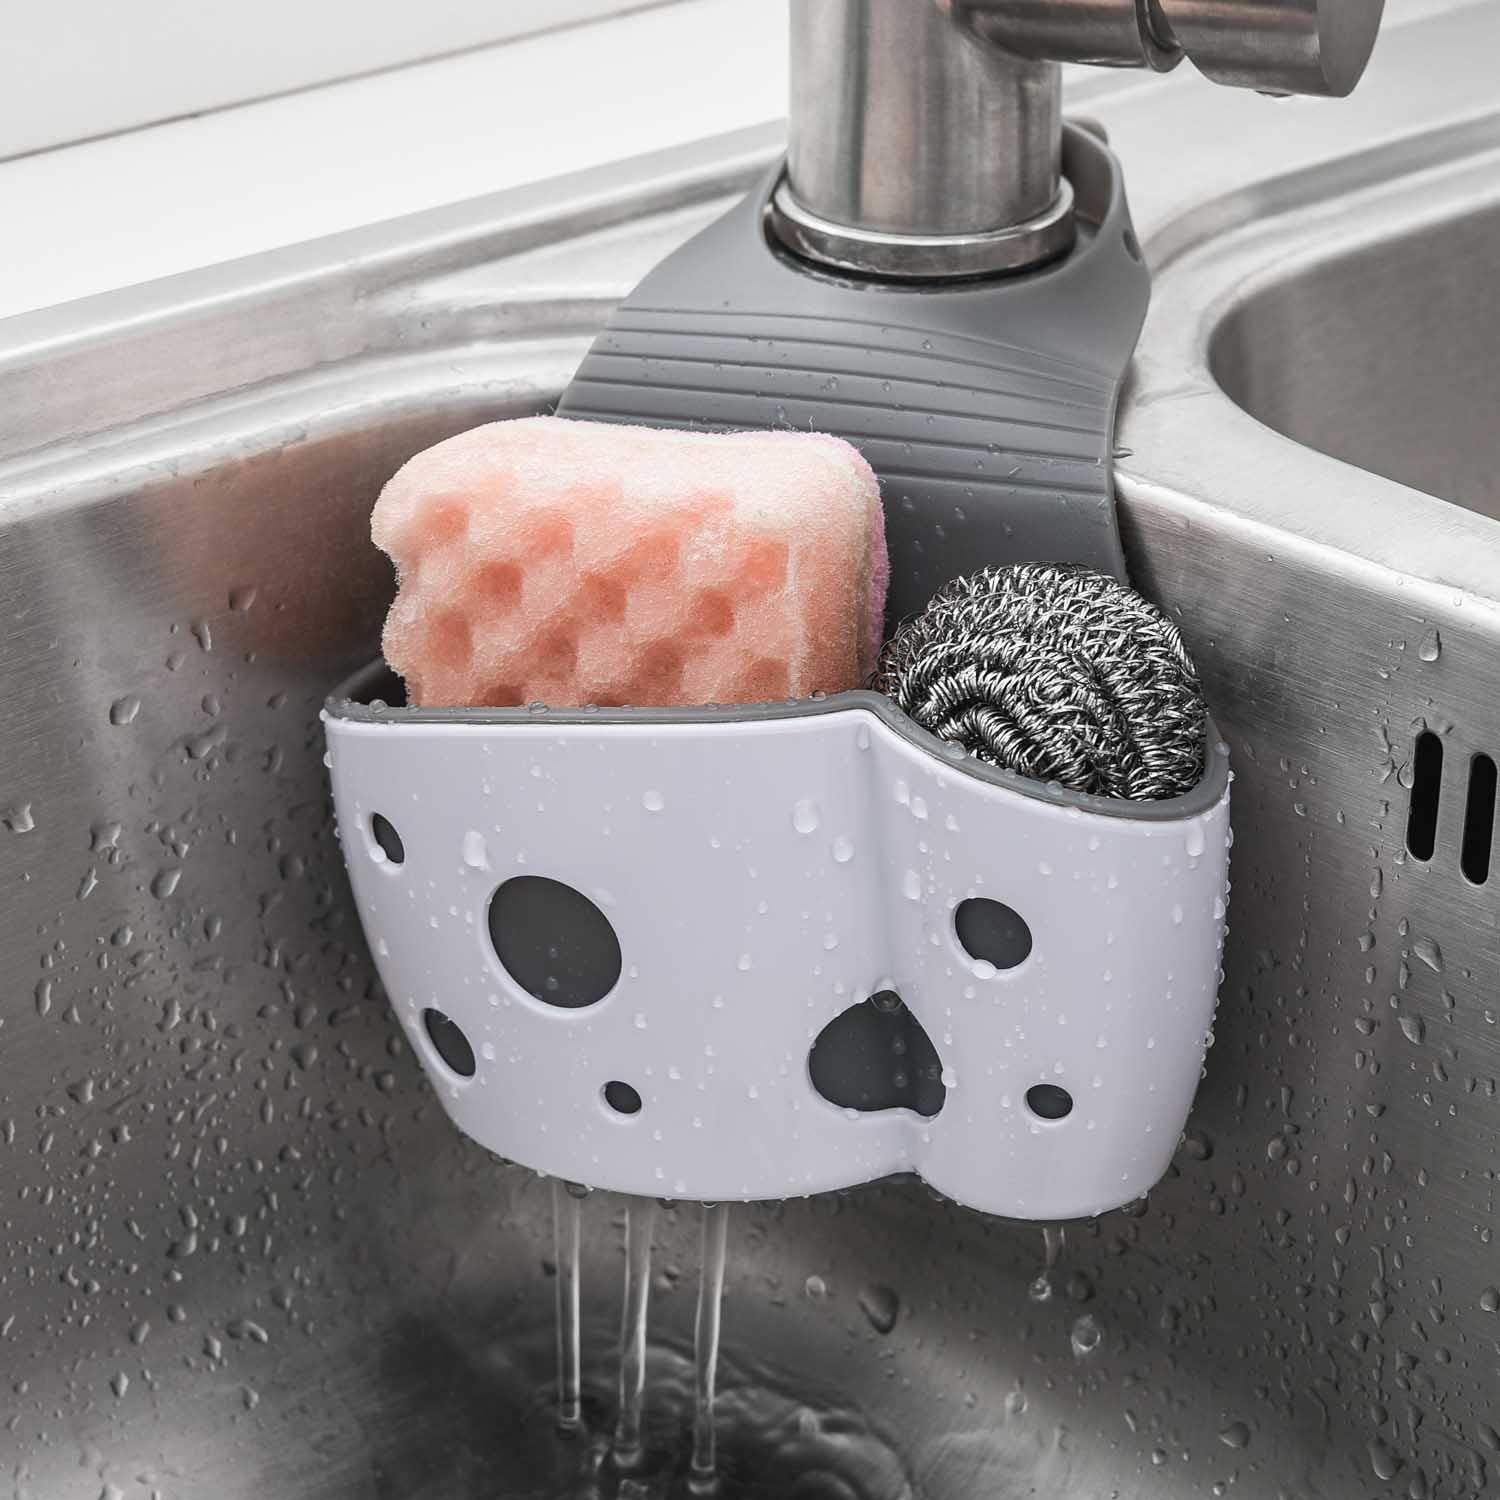 Slopehill 2 Pack Kitchen Sink Caddy Sponge Holder Silicone Plastic Soap Holder Hanging Ajustable Strap Faucet Caddy with Drain Holes for Drying, Size: 21